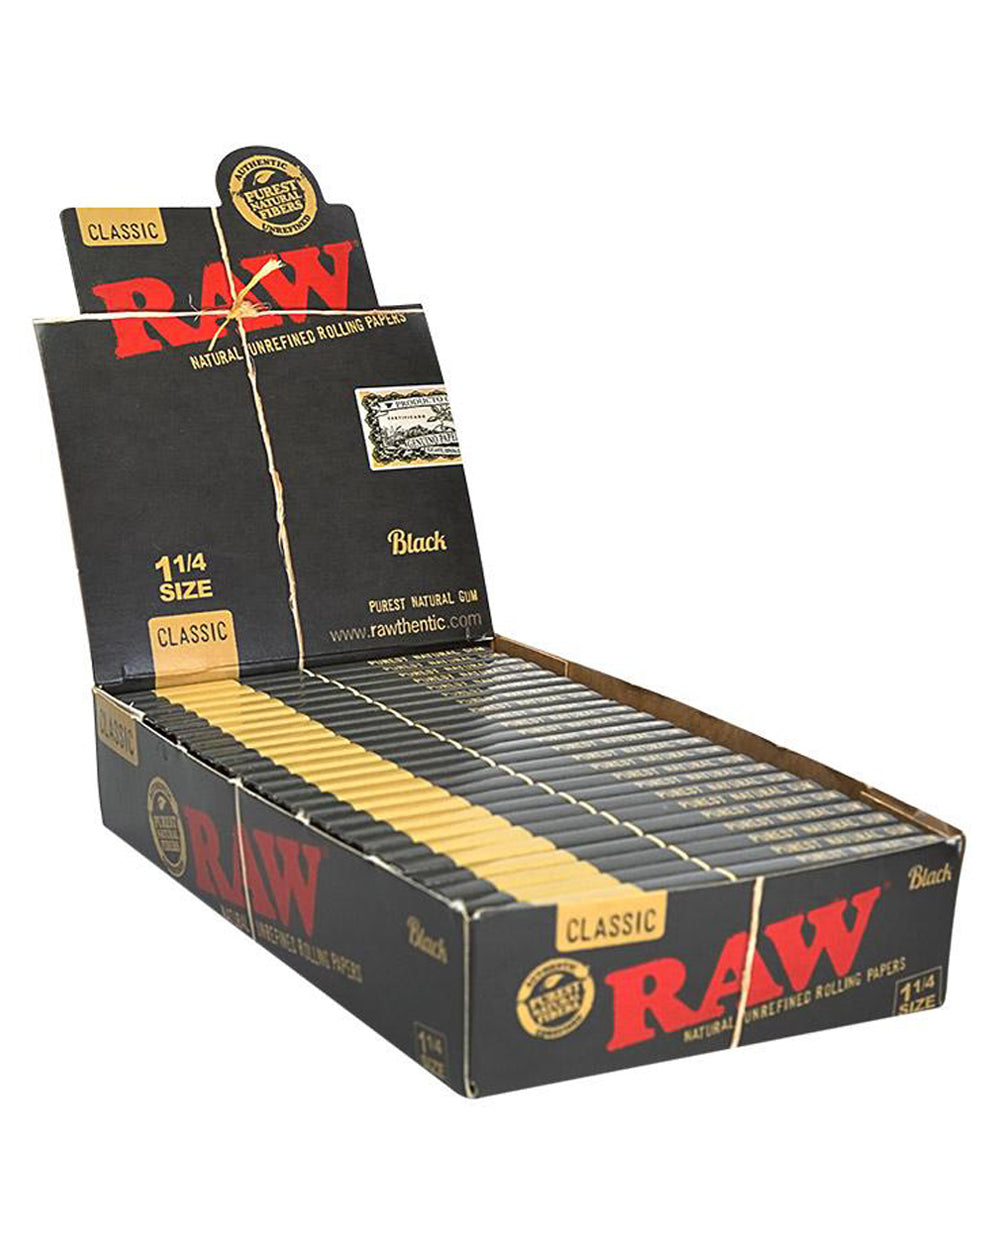 RAW | 'Retail Display' 1 1/4 Size Black Natural Rolling Papers | 83mm - Classic - 24 Count - 1